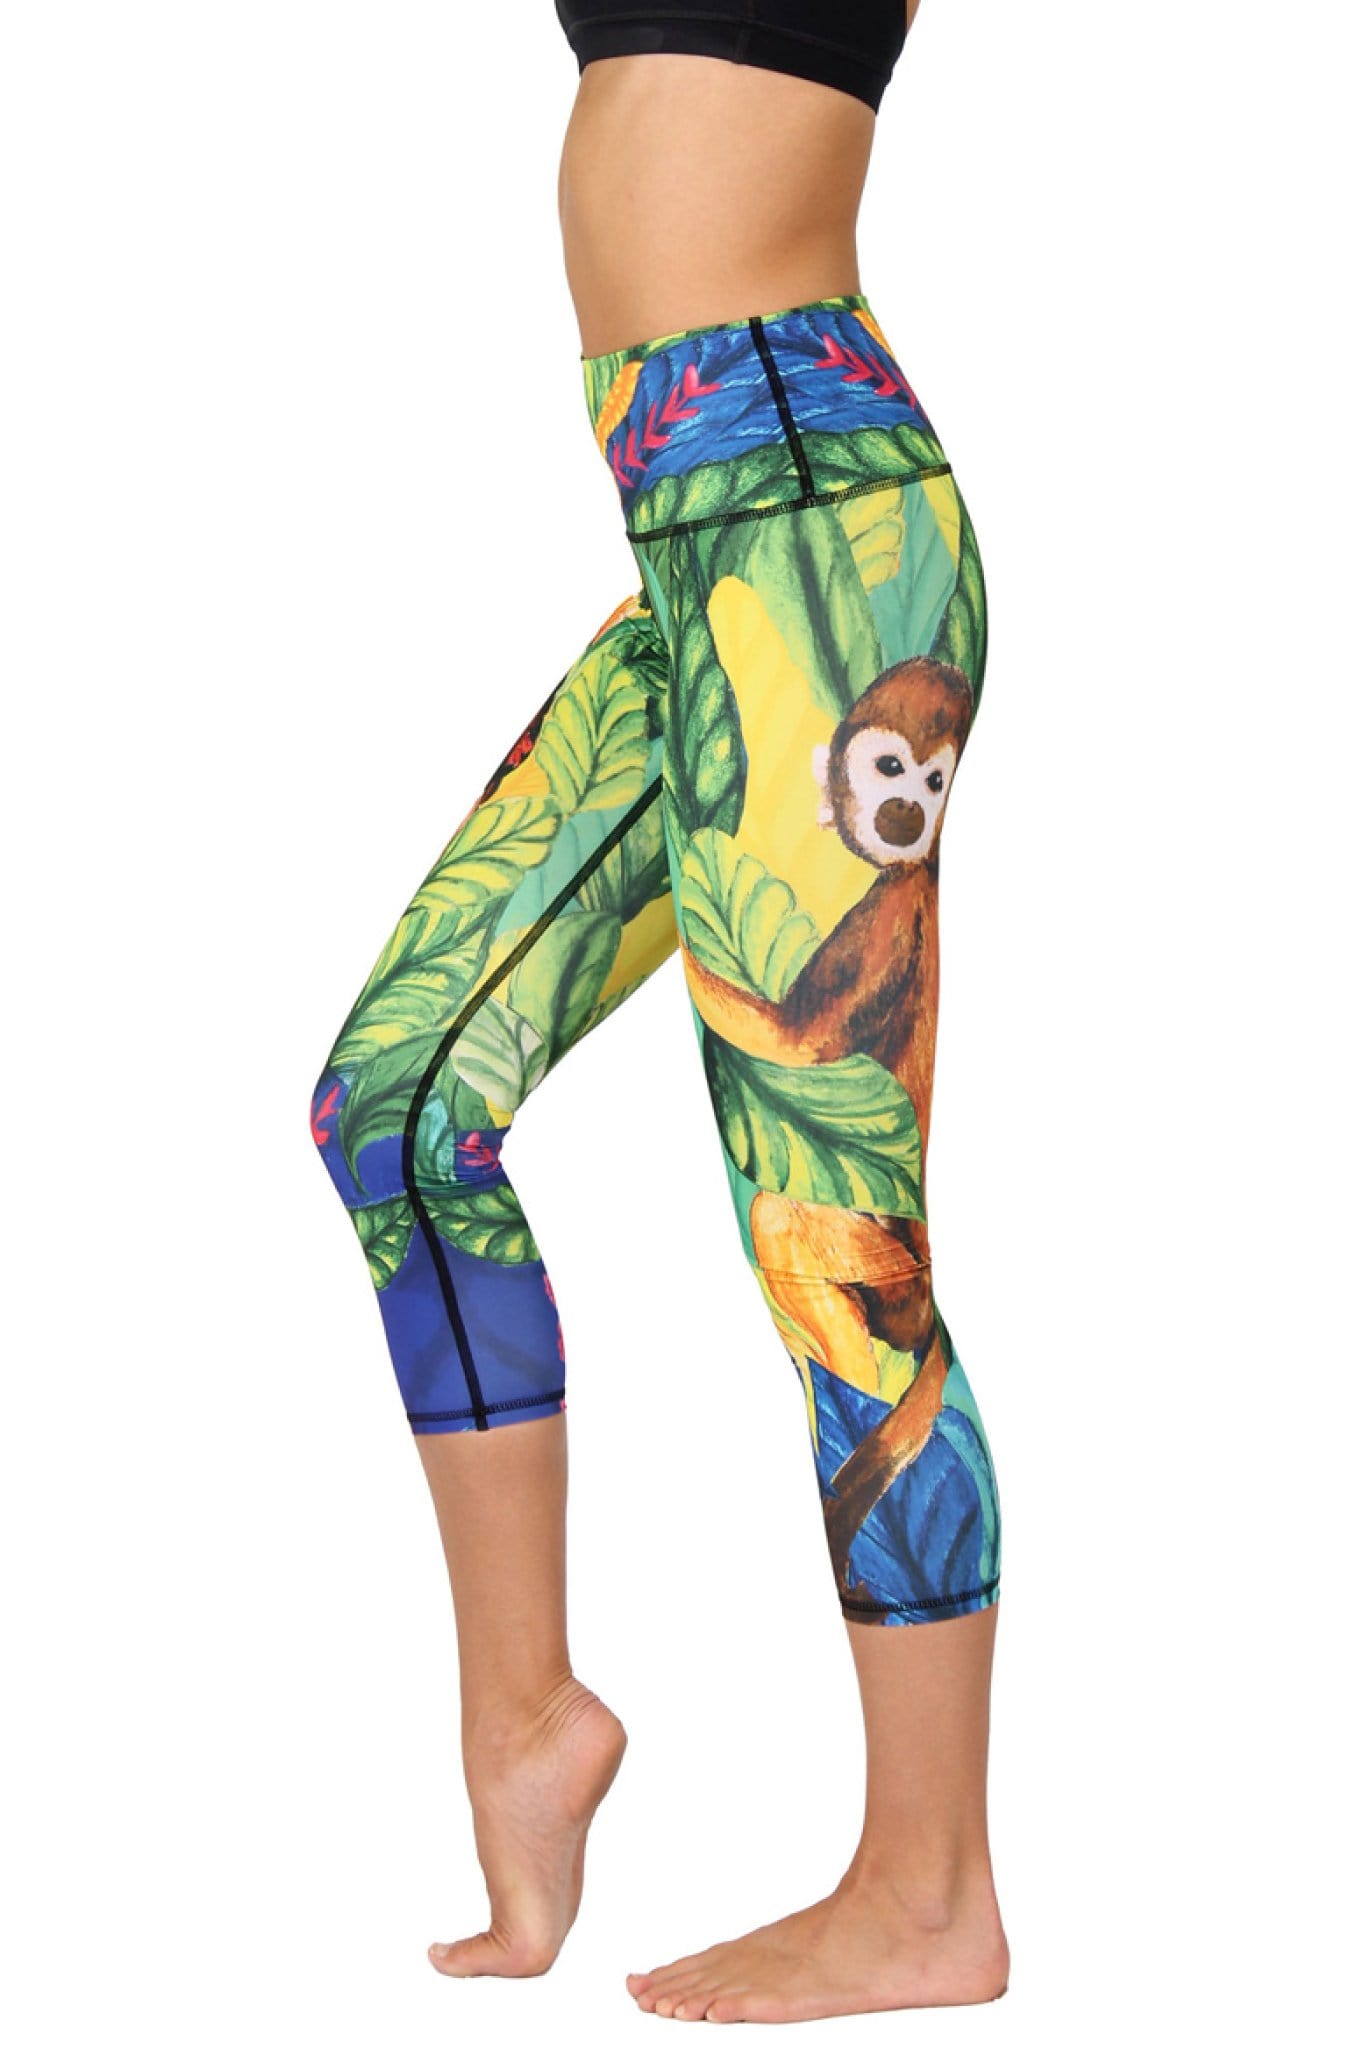 Funky Simplicity - Sustainable Yoga Clothing in Cotton with prints -  YogaHabits